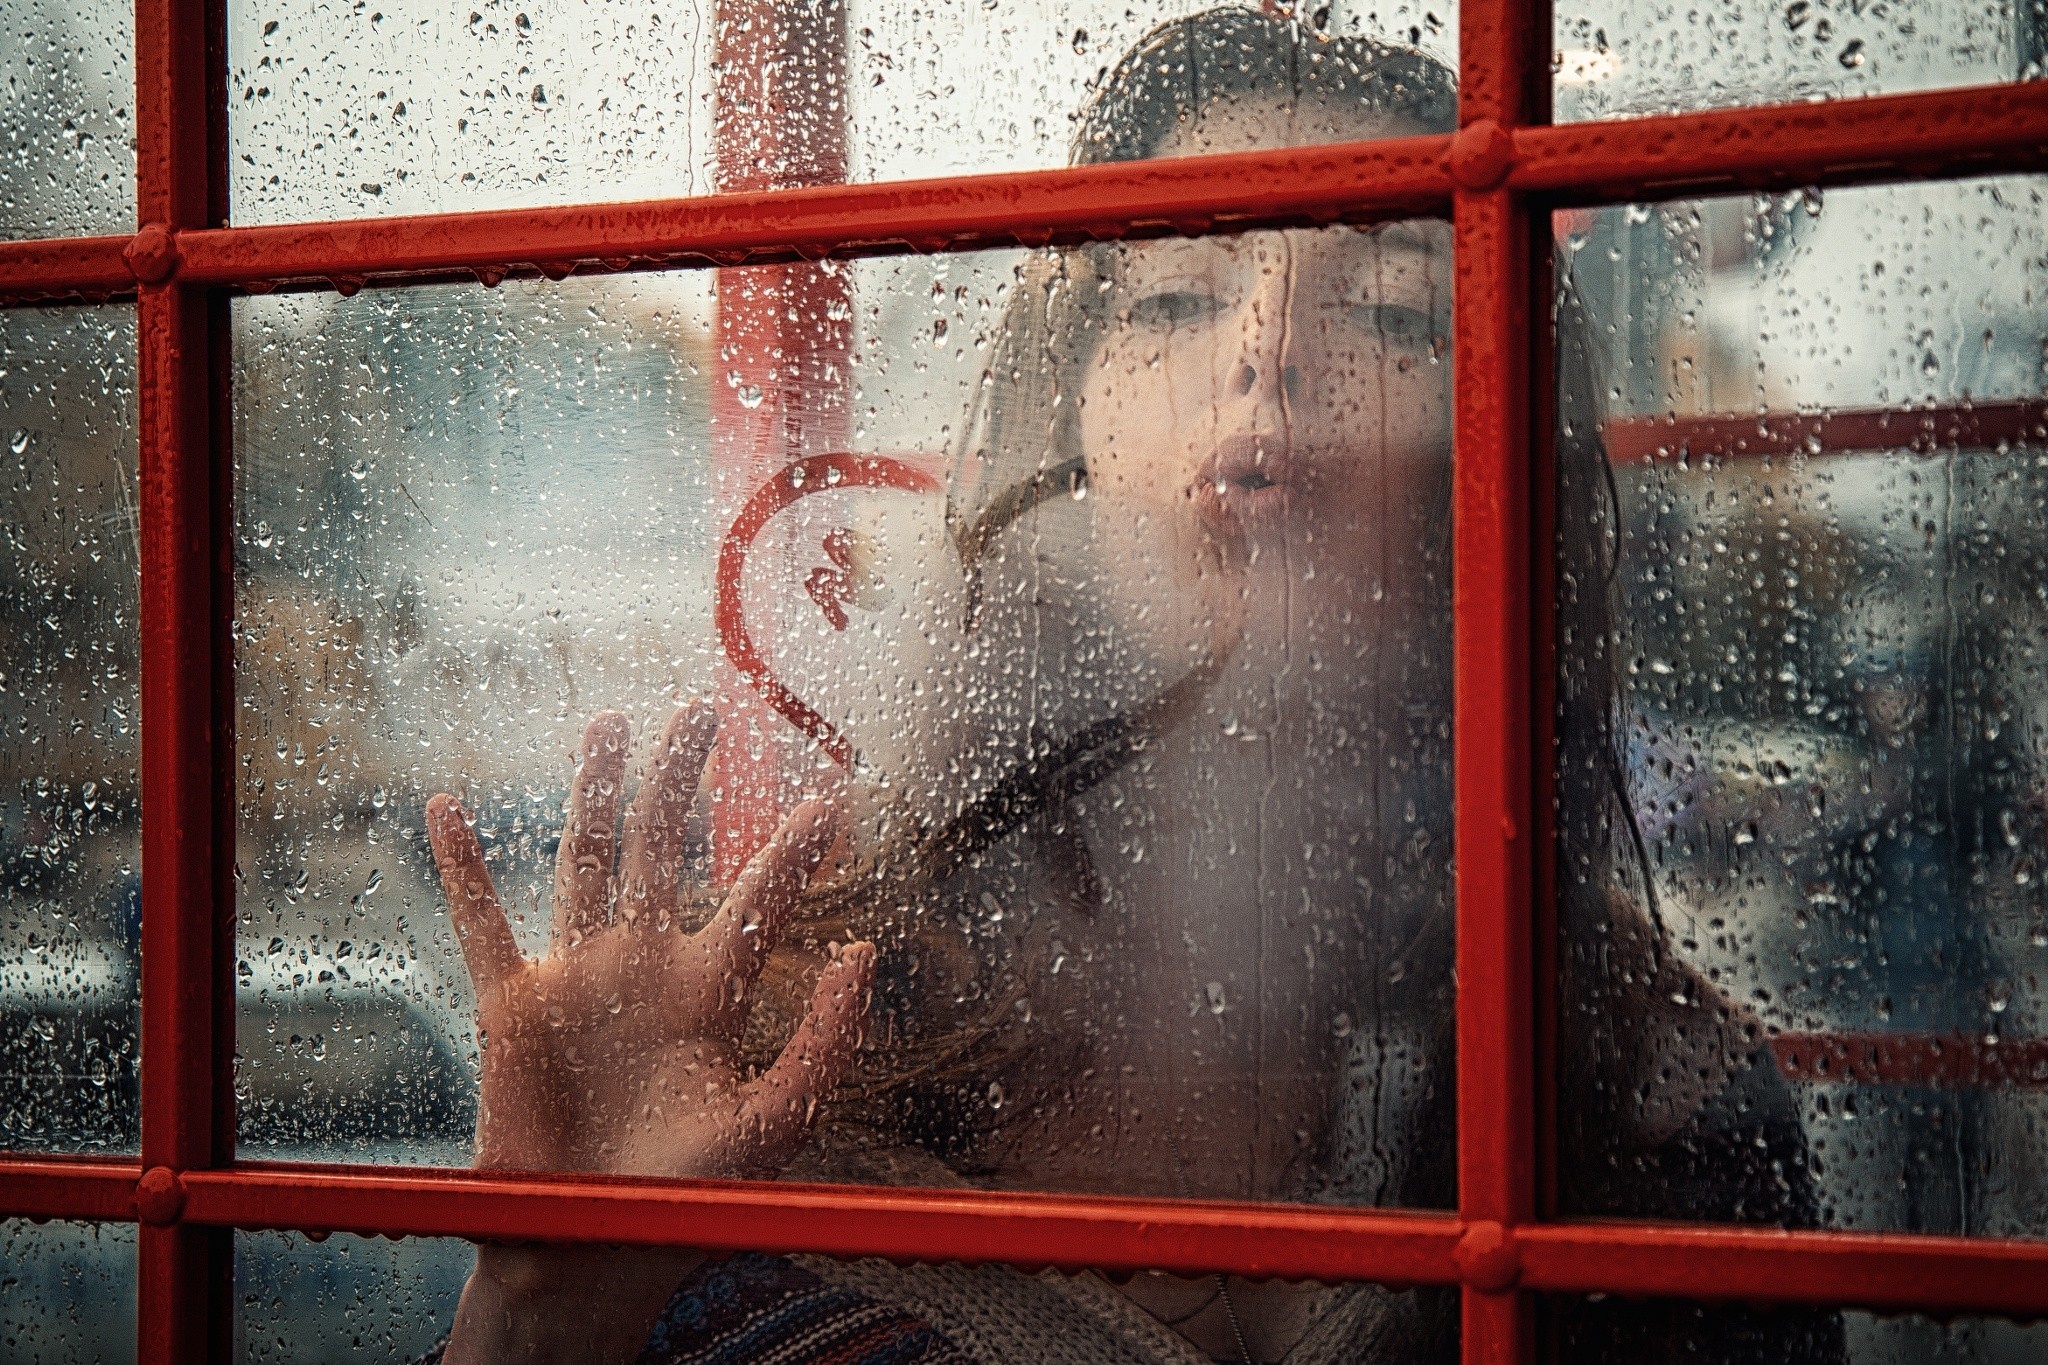 People 2048x1365 women water drops water on glass window behind the glass heart (design) model pouting hands urban